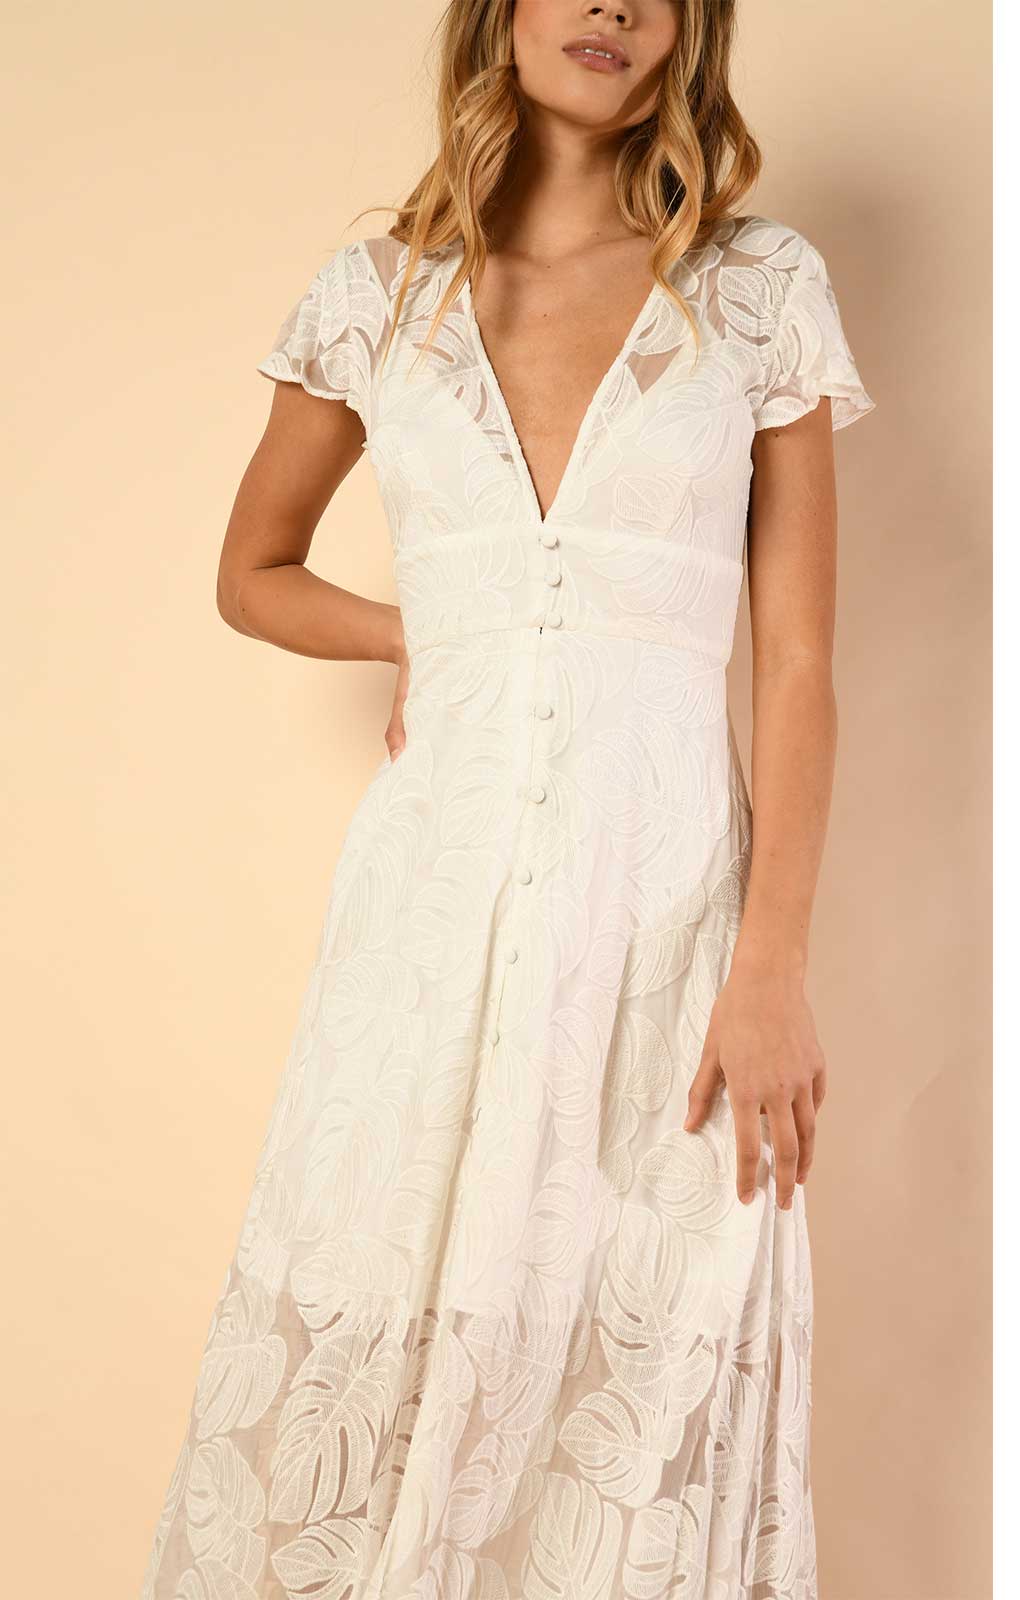 Hutch Nia Dress in White Monsteras Leaf product image